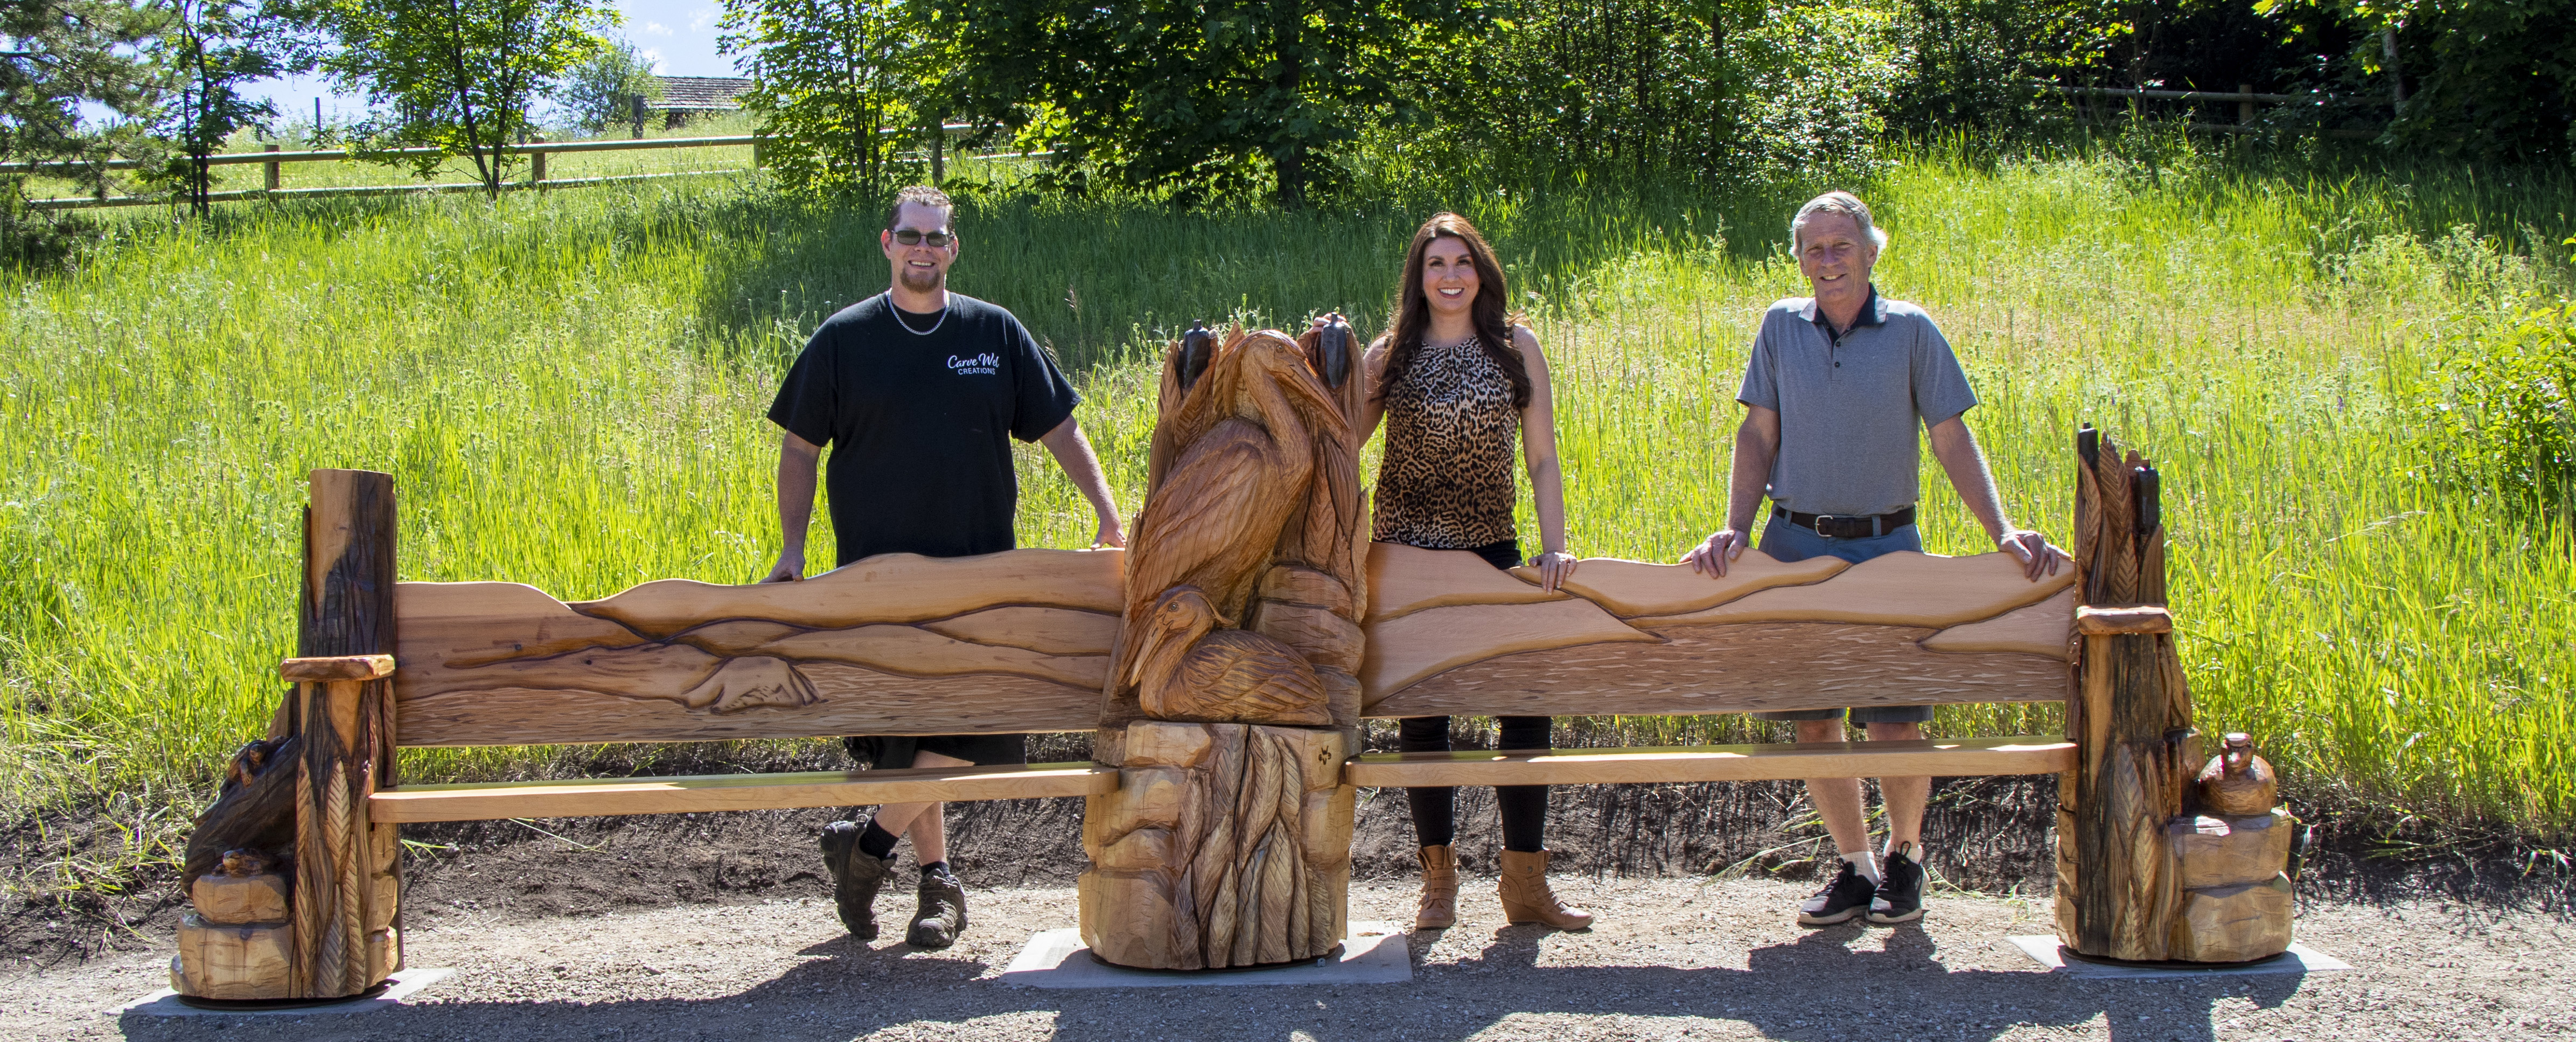 Artist Tyler Welfing, Director Amanda Shatzko, and Director Bob Fleming standing at the new bench at Cools Pond